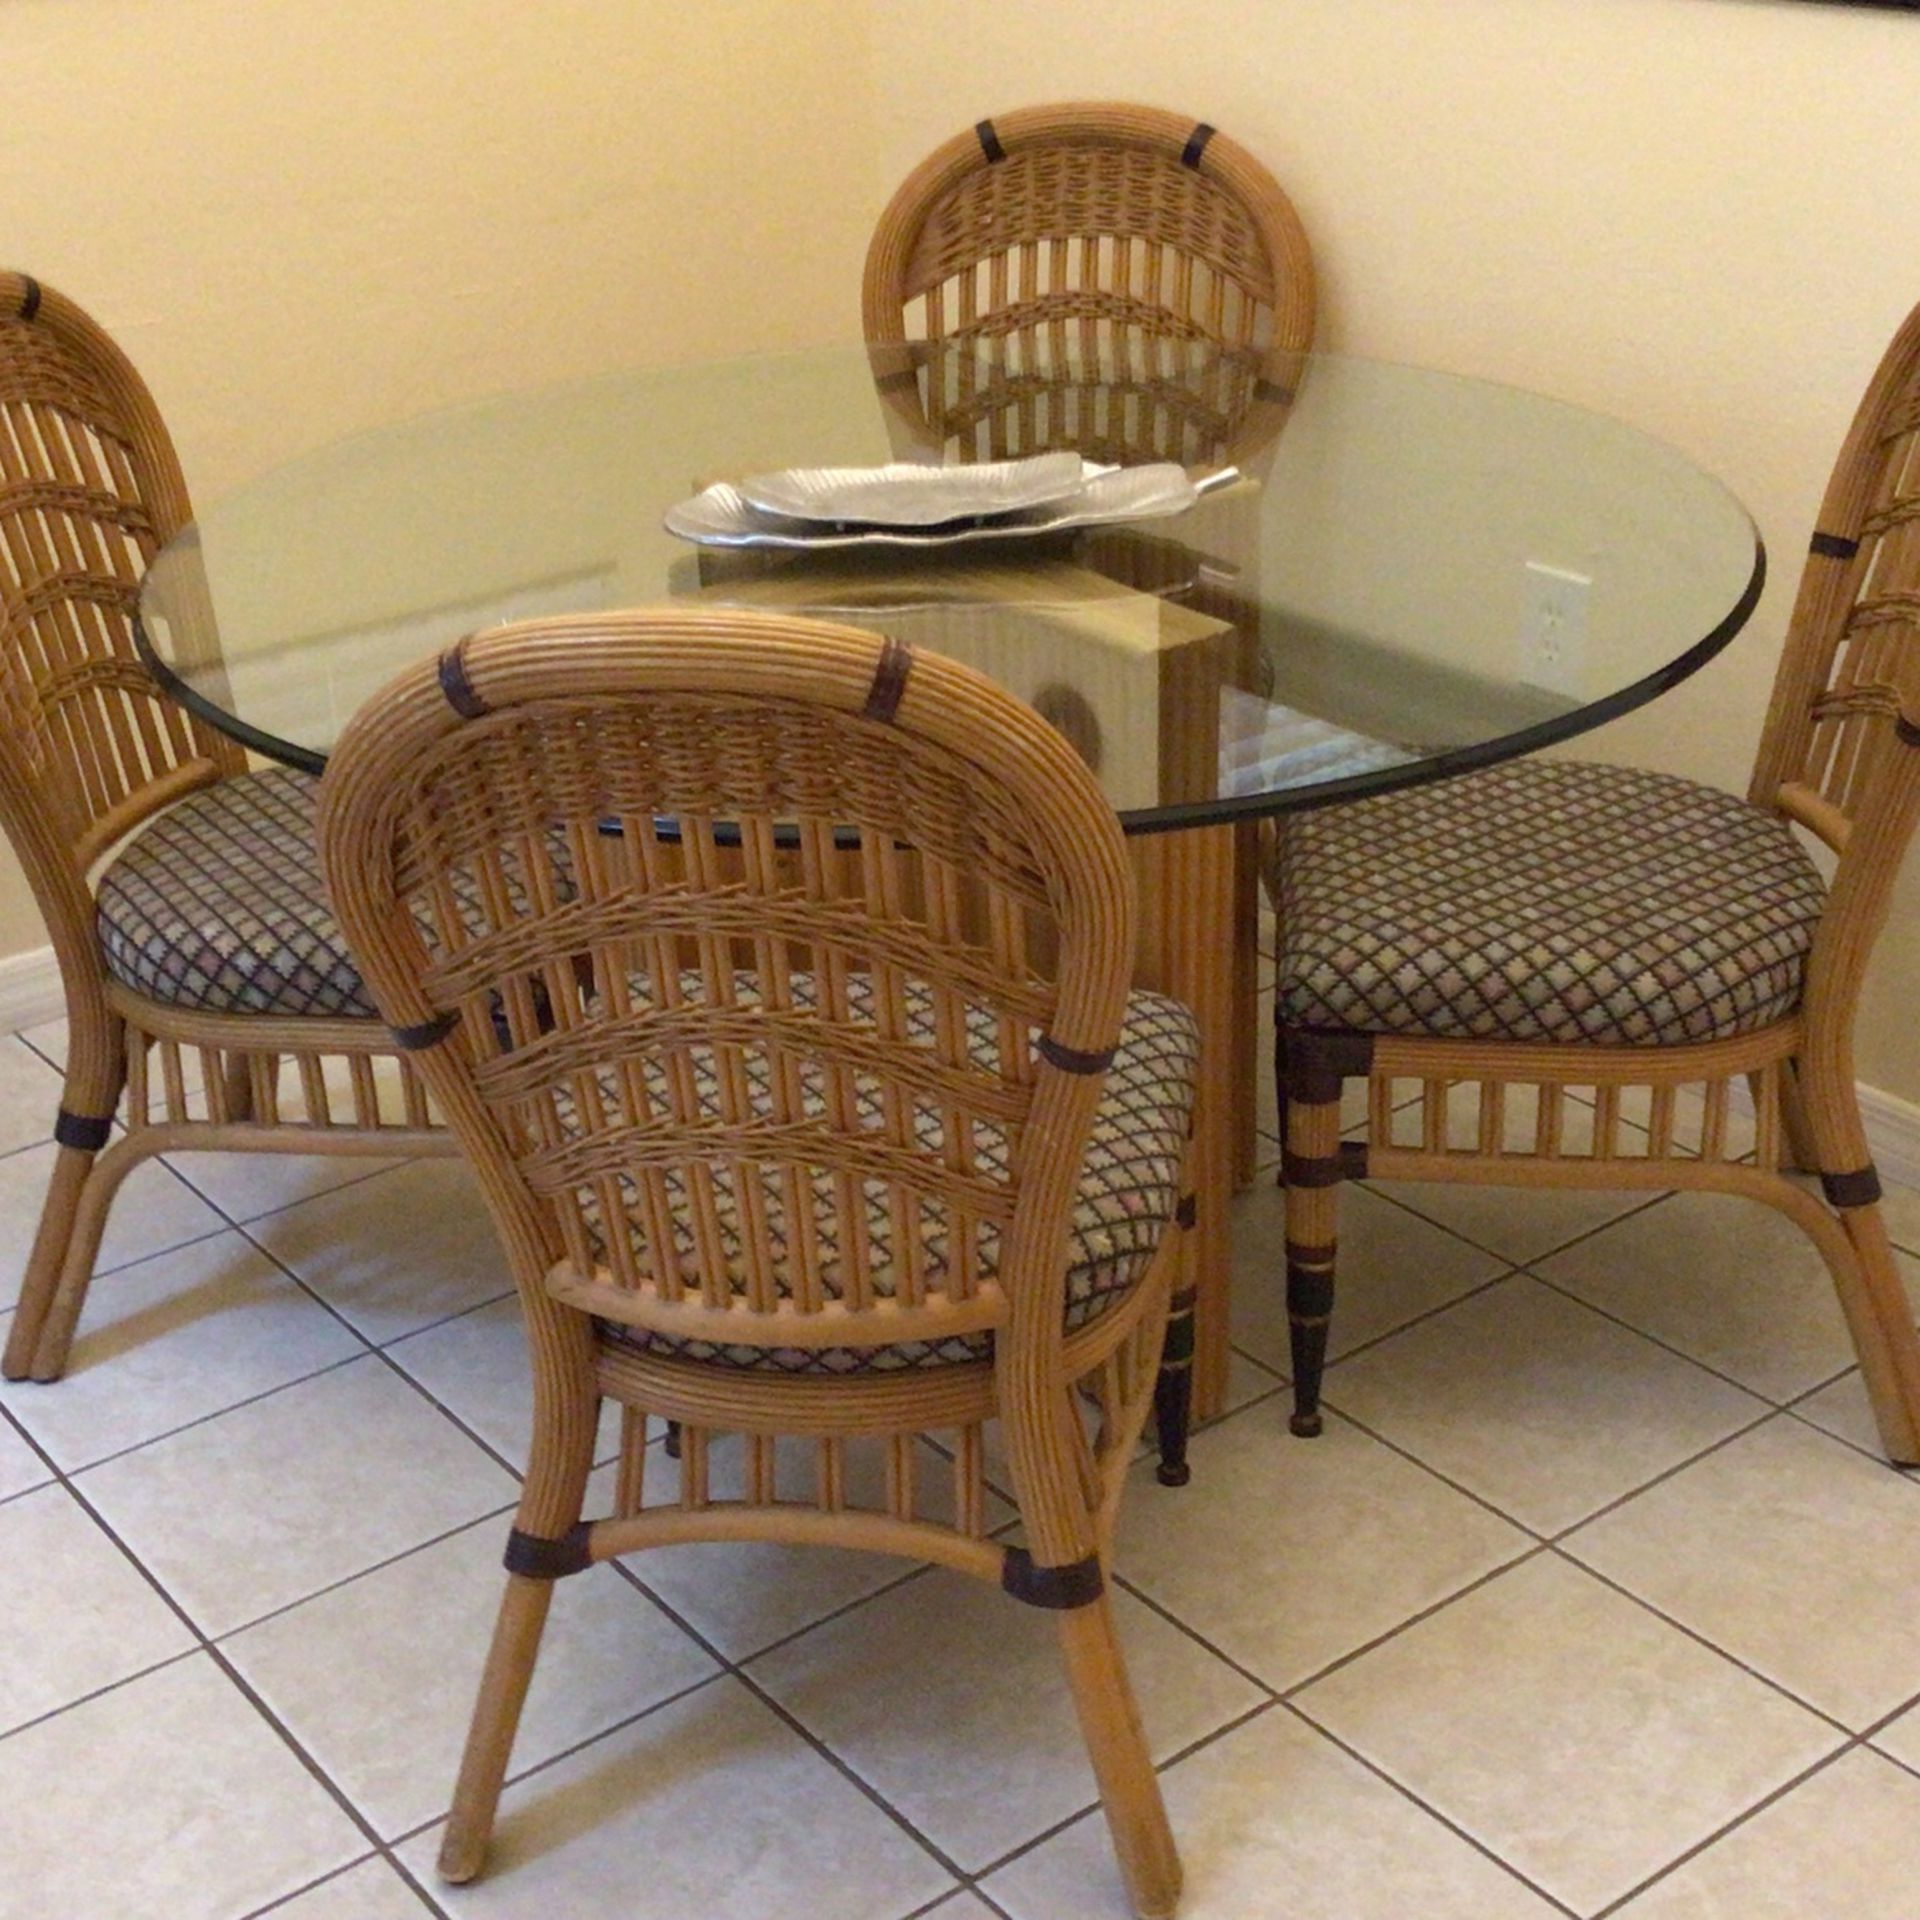 Breakfast/Dining Set - Very Good Condition